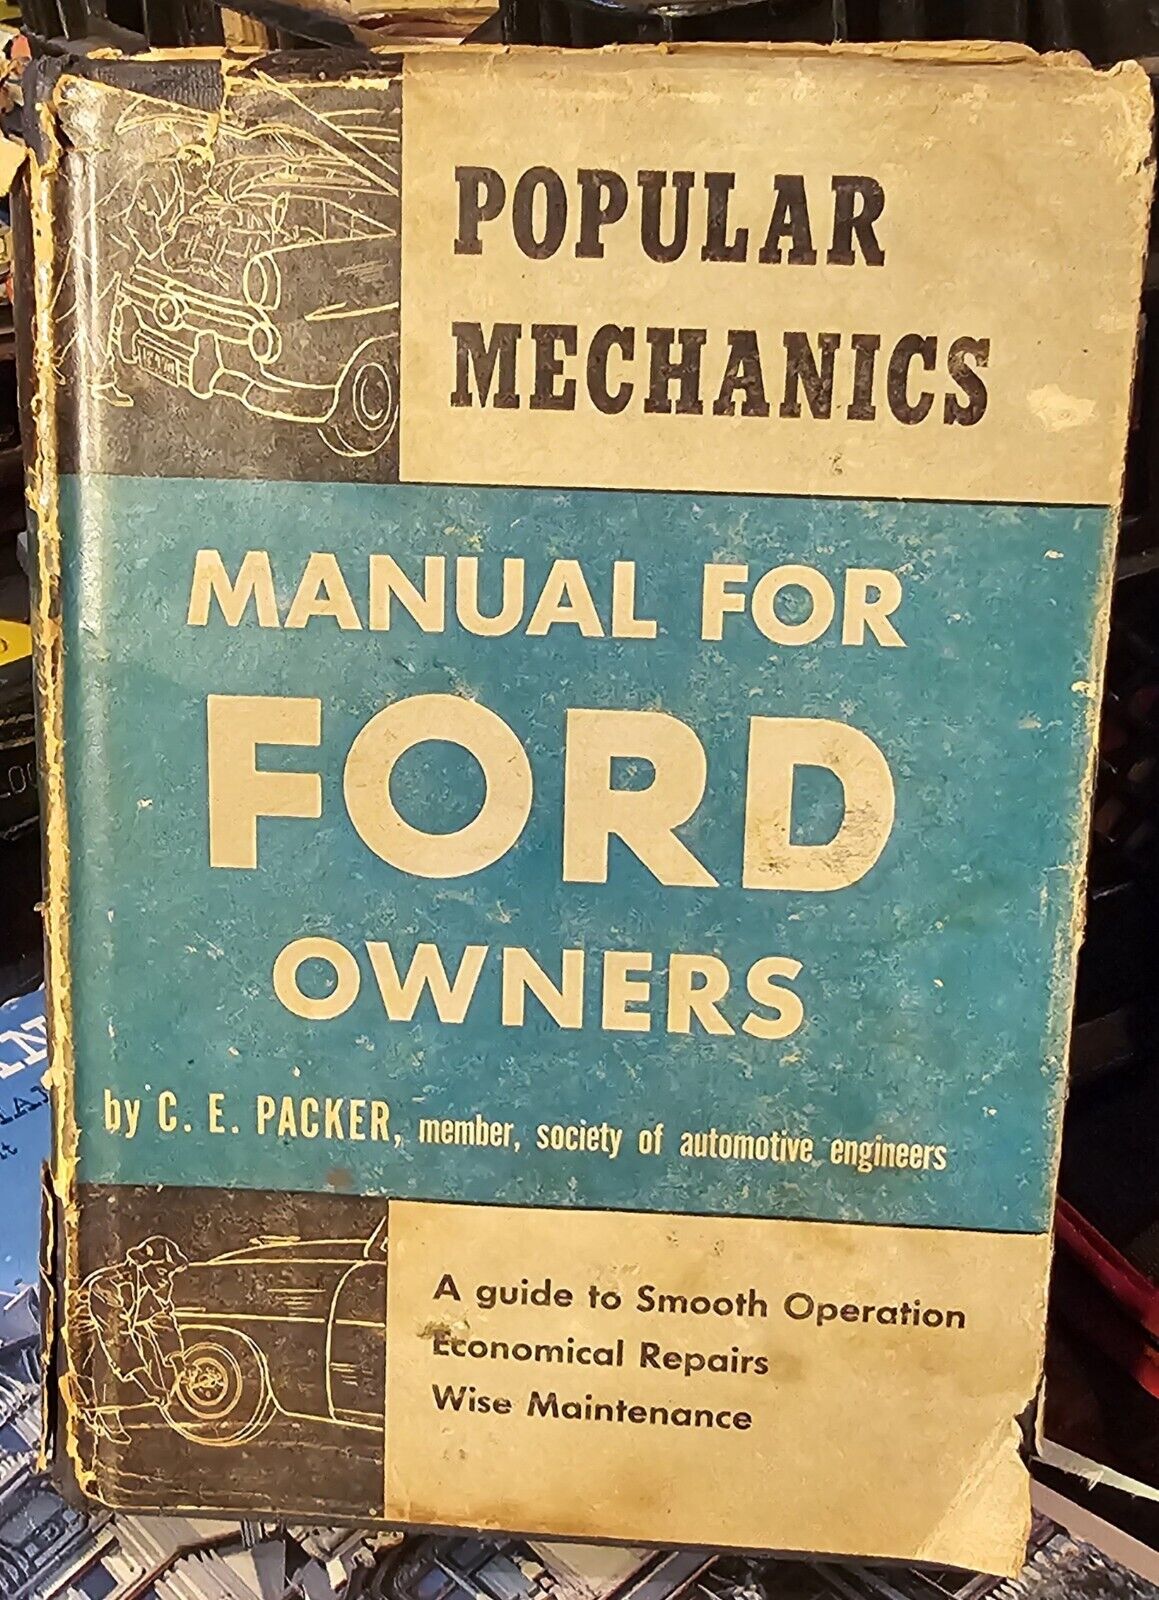 Popular Mechanics Manual for Ford Owners by C.E. Packer Hardcover Book 1952